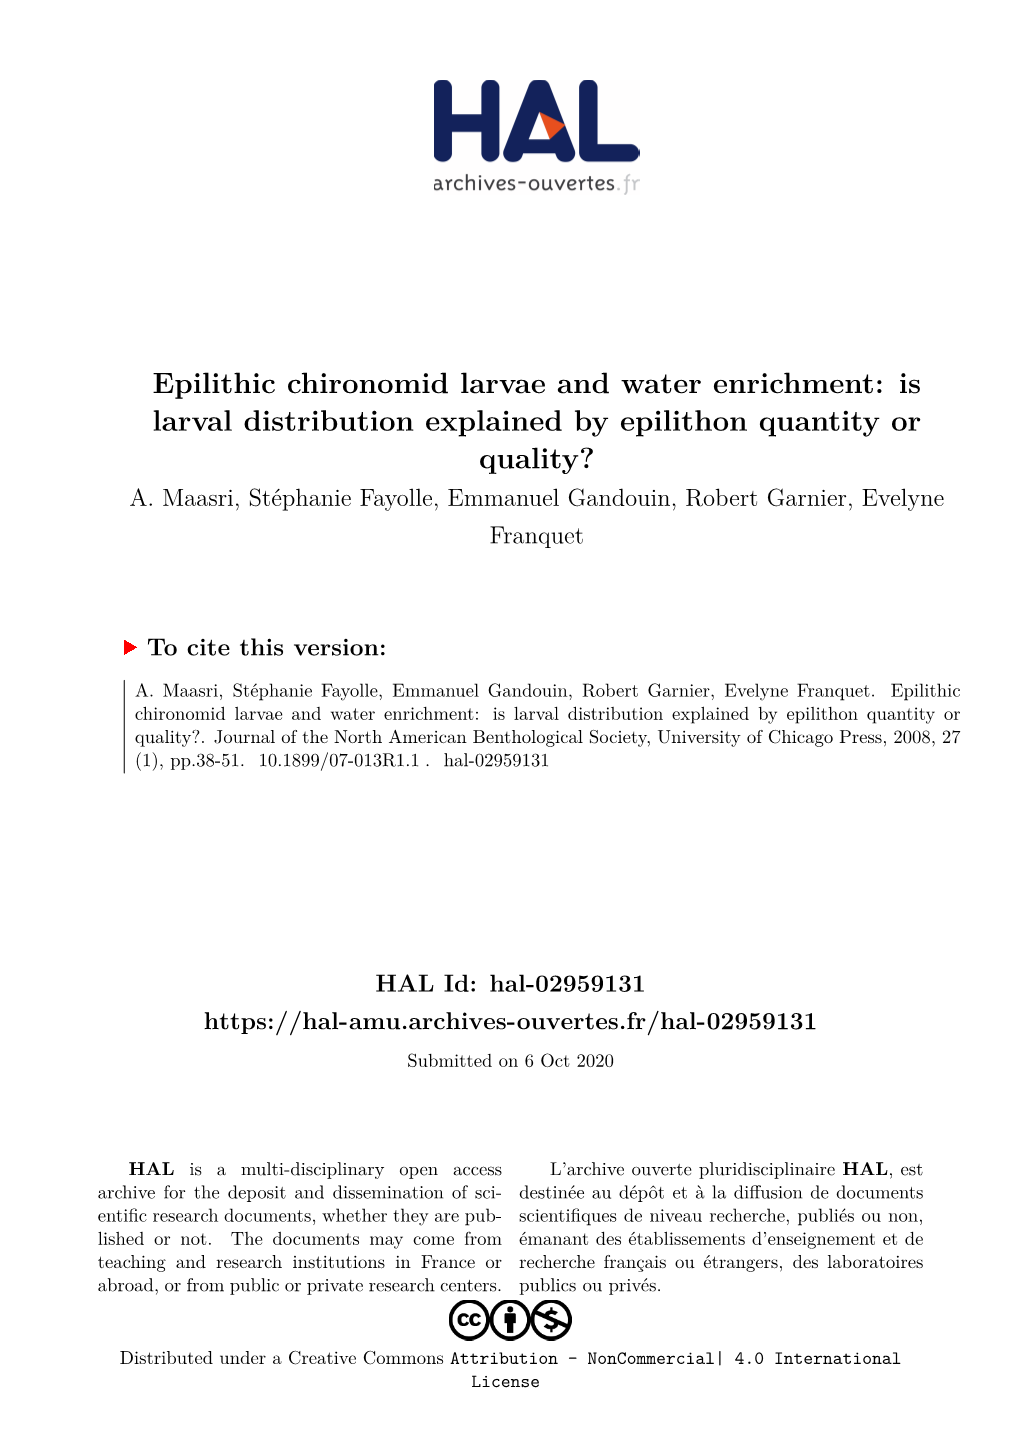 Epilithic Chironomid Larvae and Water Enrichment: Is Larval Distribution Explained by Epilithon Quantity Or Quality? A